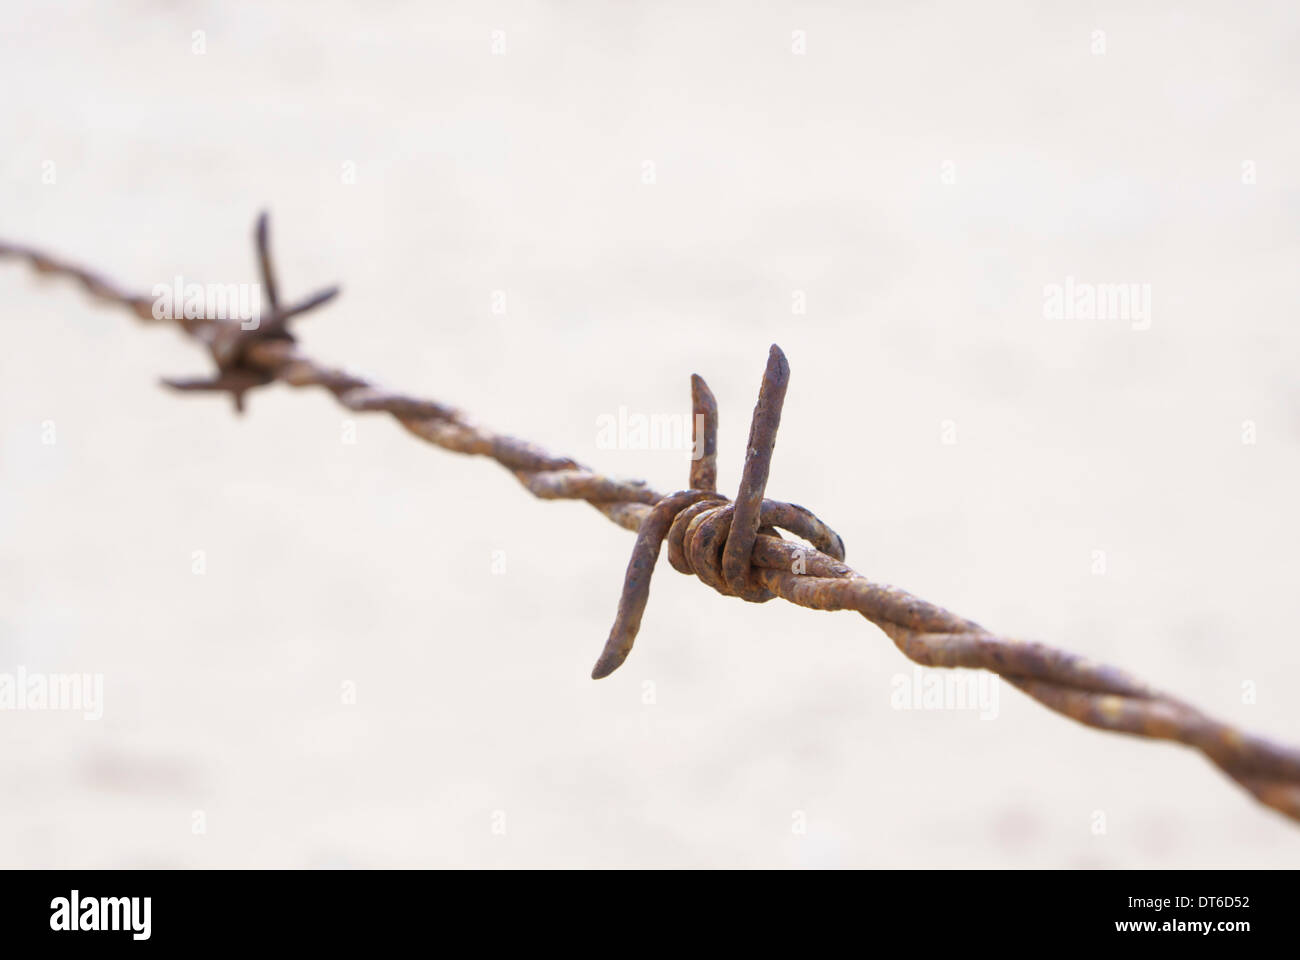 Close up detail of rusty barbed wire Stock Photo